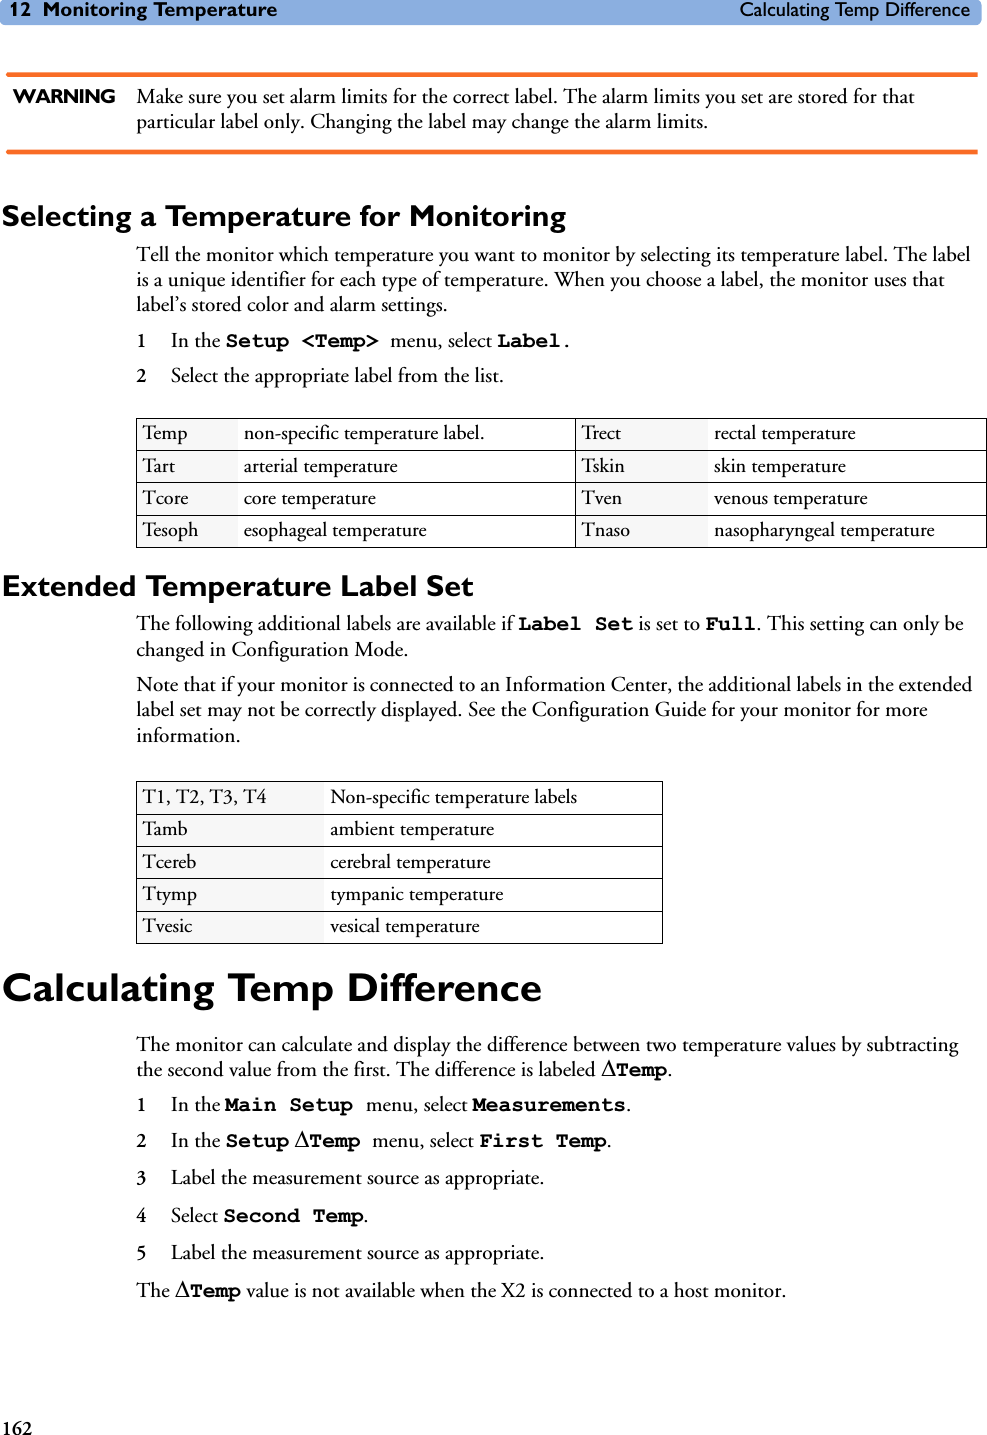 12 Monitoring Temperature Calculating Temp Difference162WARNING Make sure you set alarm limits for the correct label. The alarm limits you set are stored for that particular label only. Changing the label may change the alarm limits.Selecting a Temperature for MonitoringTell the monitor which temperature you want to monitor by selecting its temperature label. The label is a unique identifier for each type of temperature. When you choose a label, the monitor uses that label’s stored color and alarm settings.1In the Setup &lt;Temp&gt; menu, select Label.2Select the appropriate label from the list.Extended Temperature Label Set The following additional labels are available if Label Set is set to Full. This setting can only be changed in Configuration Mode. Note that if your monitor is connected to an Information Center, the additional labels in the extended label set may not be correctly displayed. See the Configuration Guide for your monitor for more information. Calculating Temp DifferenceThe monitor can calculate and display the difference between two temperature values by subtracting the second value from the first. The difference is labeled &apos;Temp. 1In the Main Setup menu, select Measurements.2In the Setup &apos;Temp menu, select First Temp.3Label the measurement source as appropriate.4Select Second Temp.5Label the measurement source as appropriate.The &apos;Temp value is not available when the X2 is connected to a host monitor. Temp non-specific temperature label. Trect rectal temperatureTart arterial temperature Tskin skin temperatureTcore core temperature Tven venous temperatureTesoph esophageal temperature Tnaso nasopharyngeal temperatureT1, T2, T3, T4 Non-specific temperature labelsTamb ambient temperatureTcereb cerebral temperatureTtymp tympanic temperatureTvesic vesical temperature